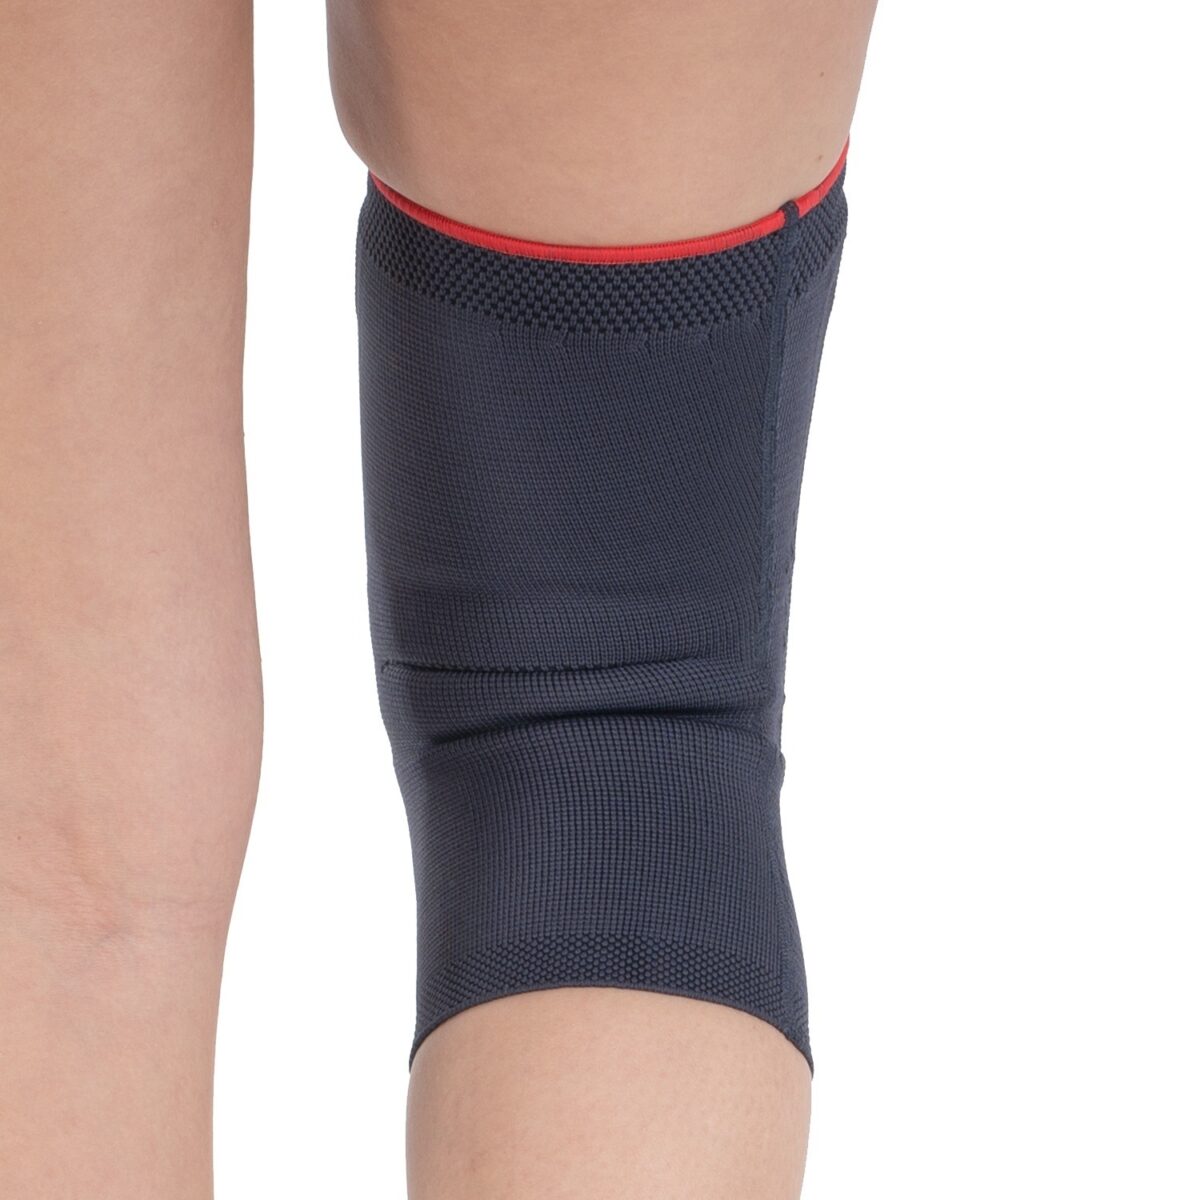 wingmed orthopedic equipments W506 woven patella and ligament knee support 69